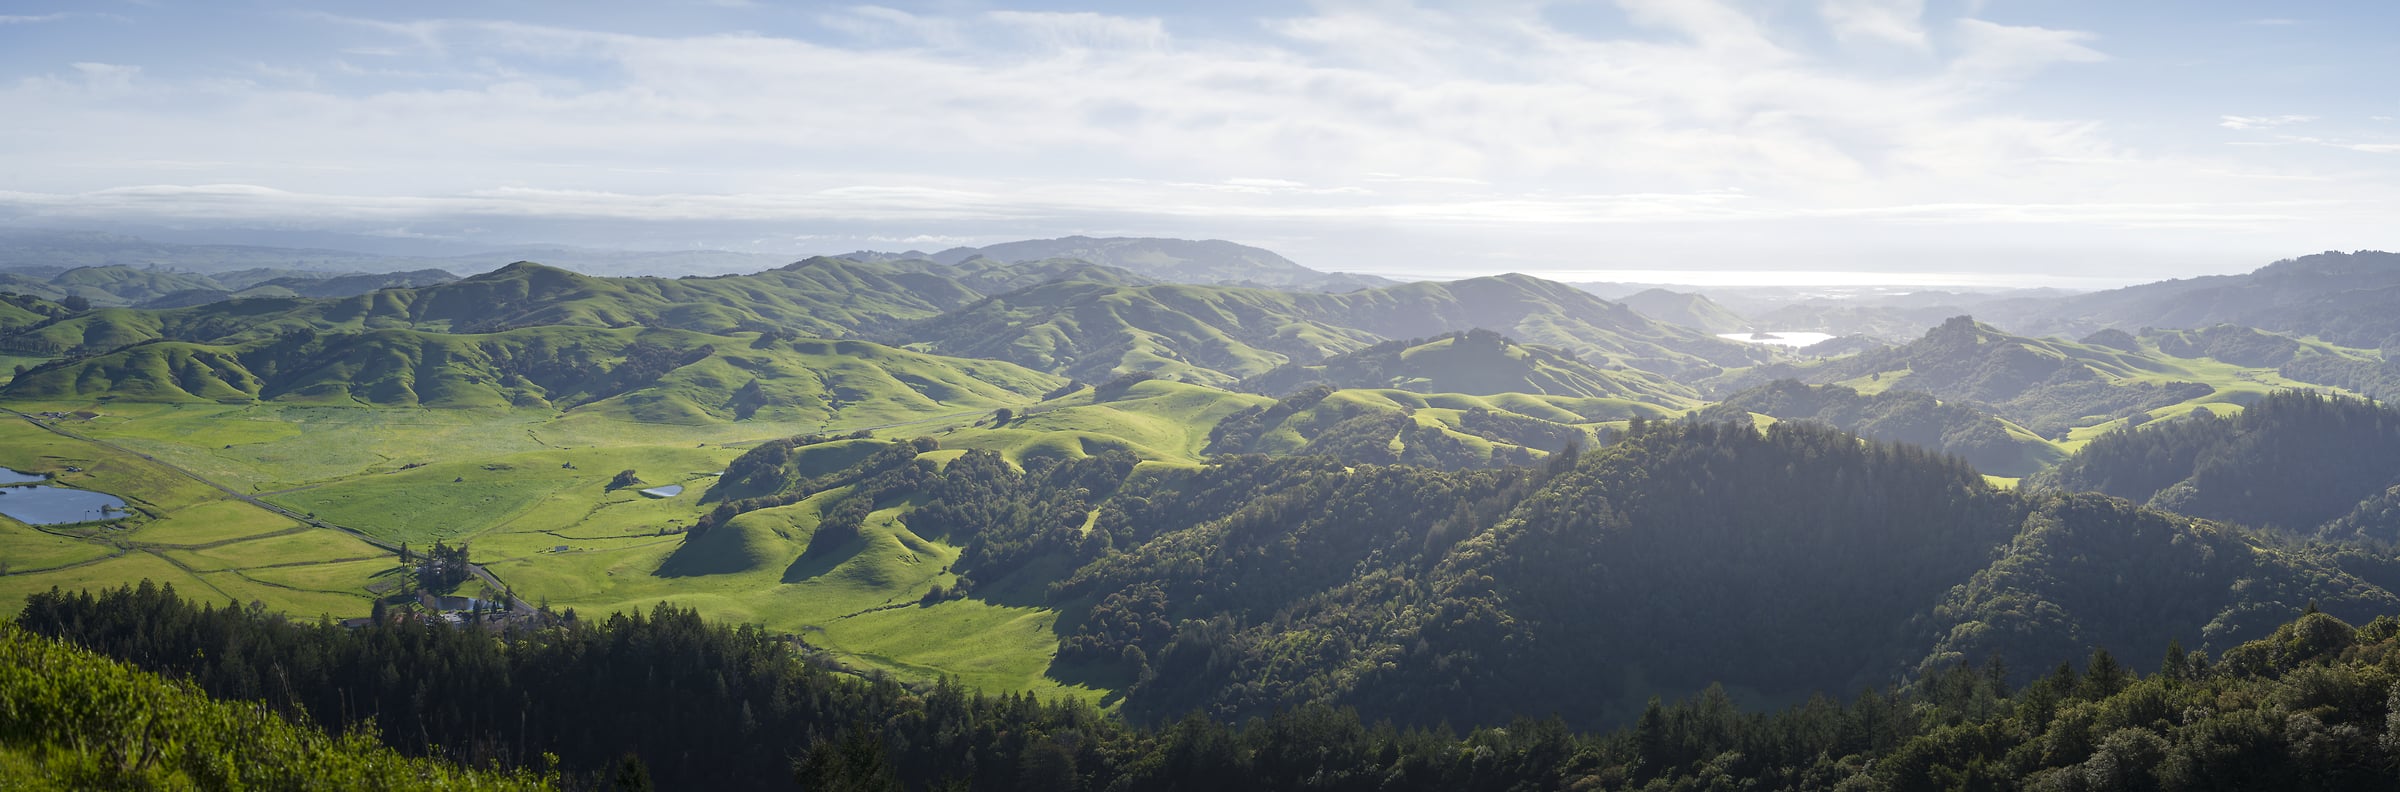 502 megapixels! A very high resolution photo of beautiful green hills; wall mural photograph created by Jeff Lewis in Marin County, California.